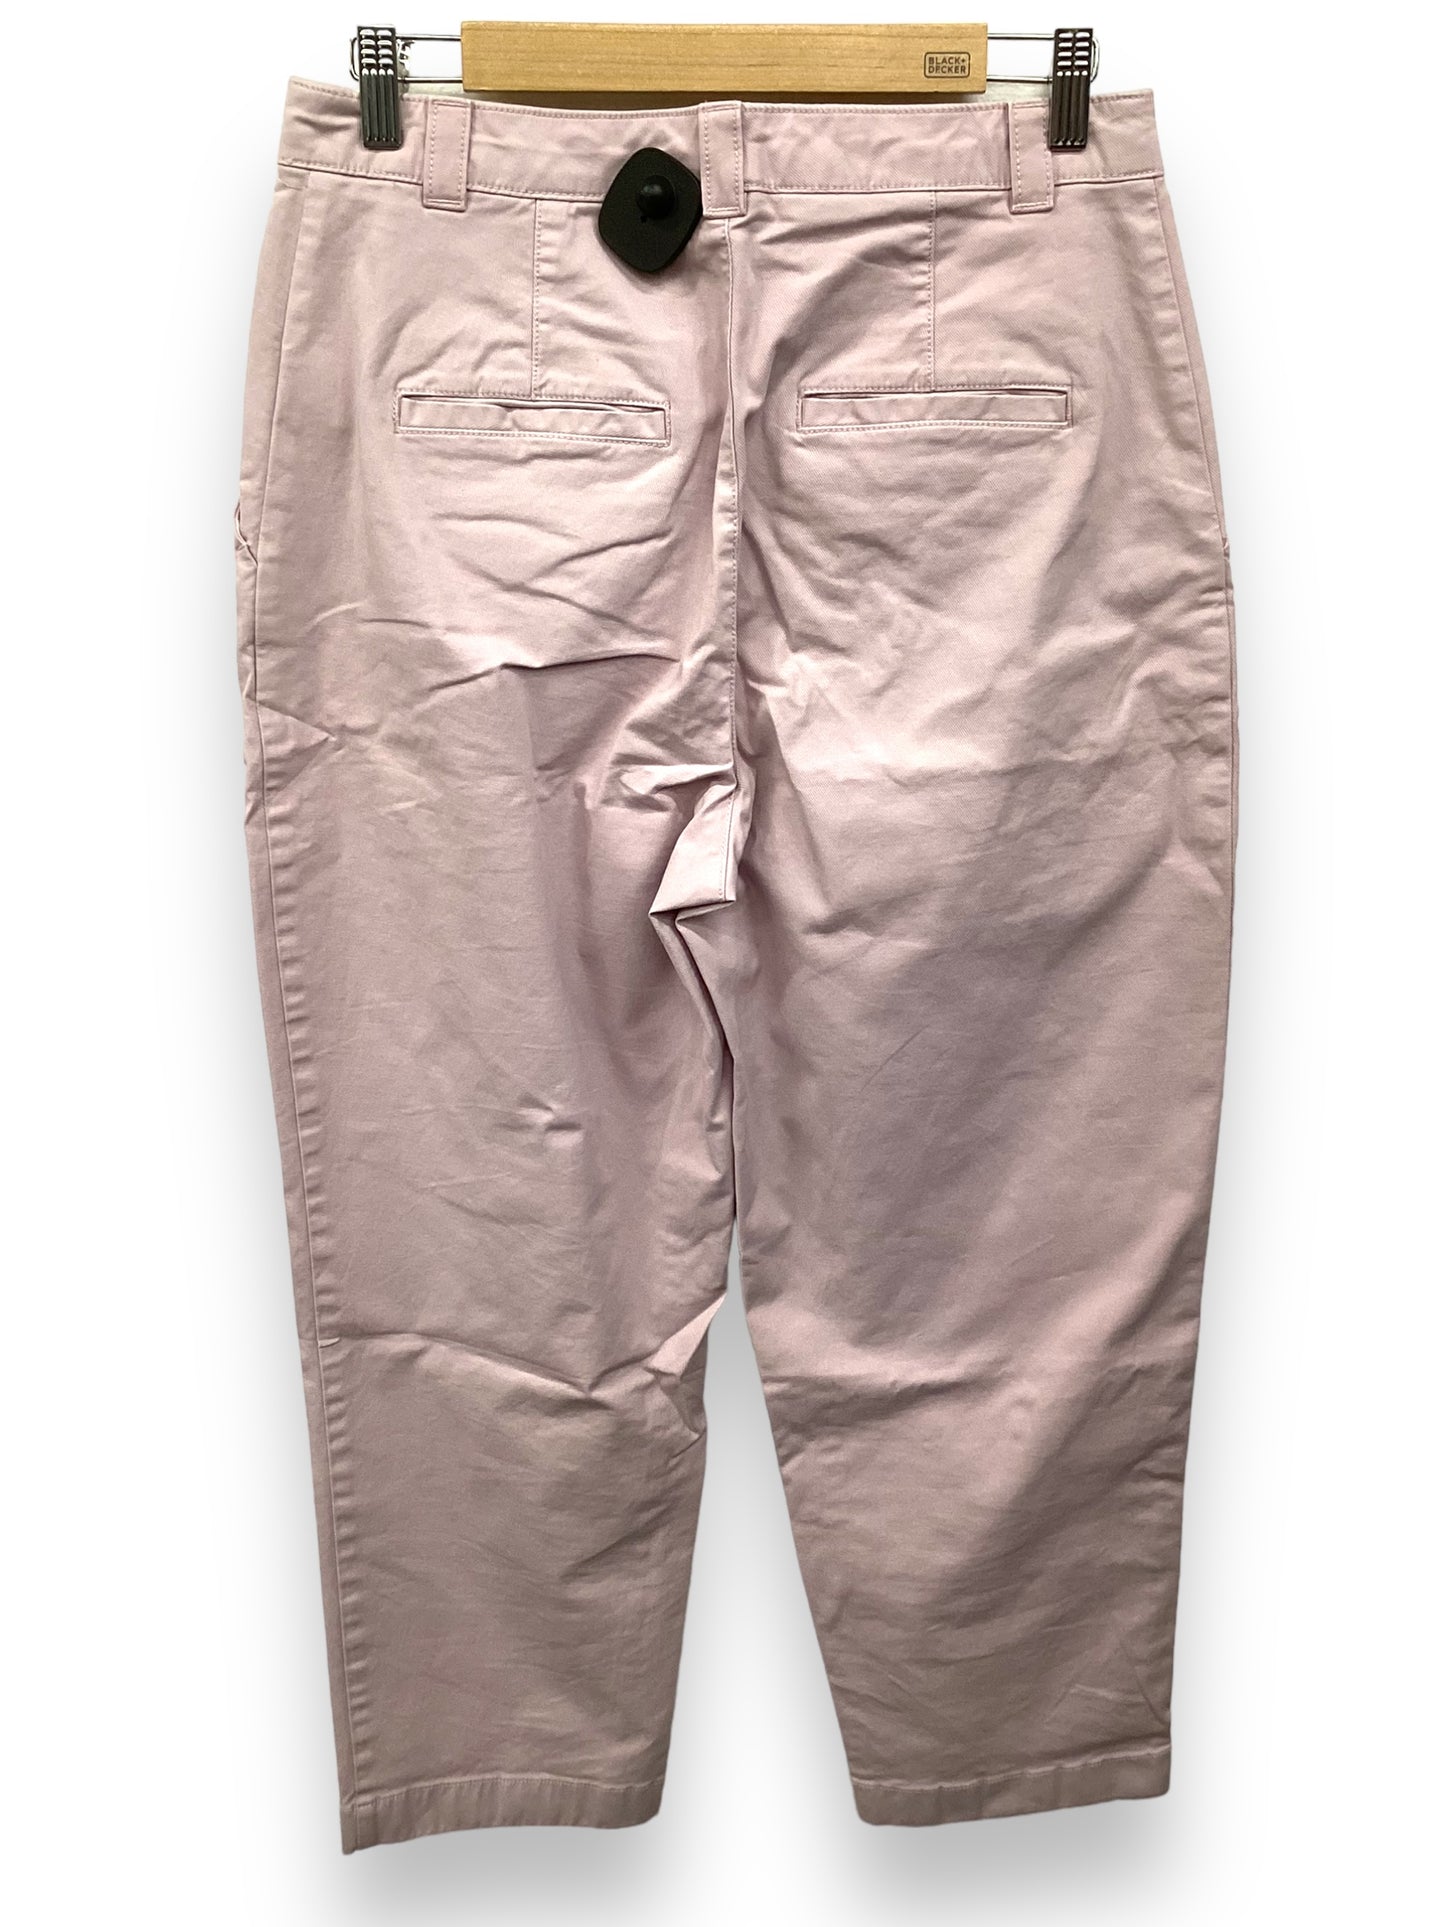 Pants Ankle By Gap  Size: 6